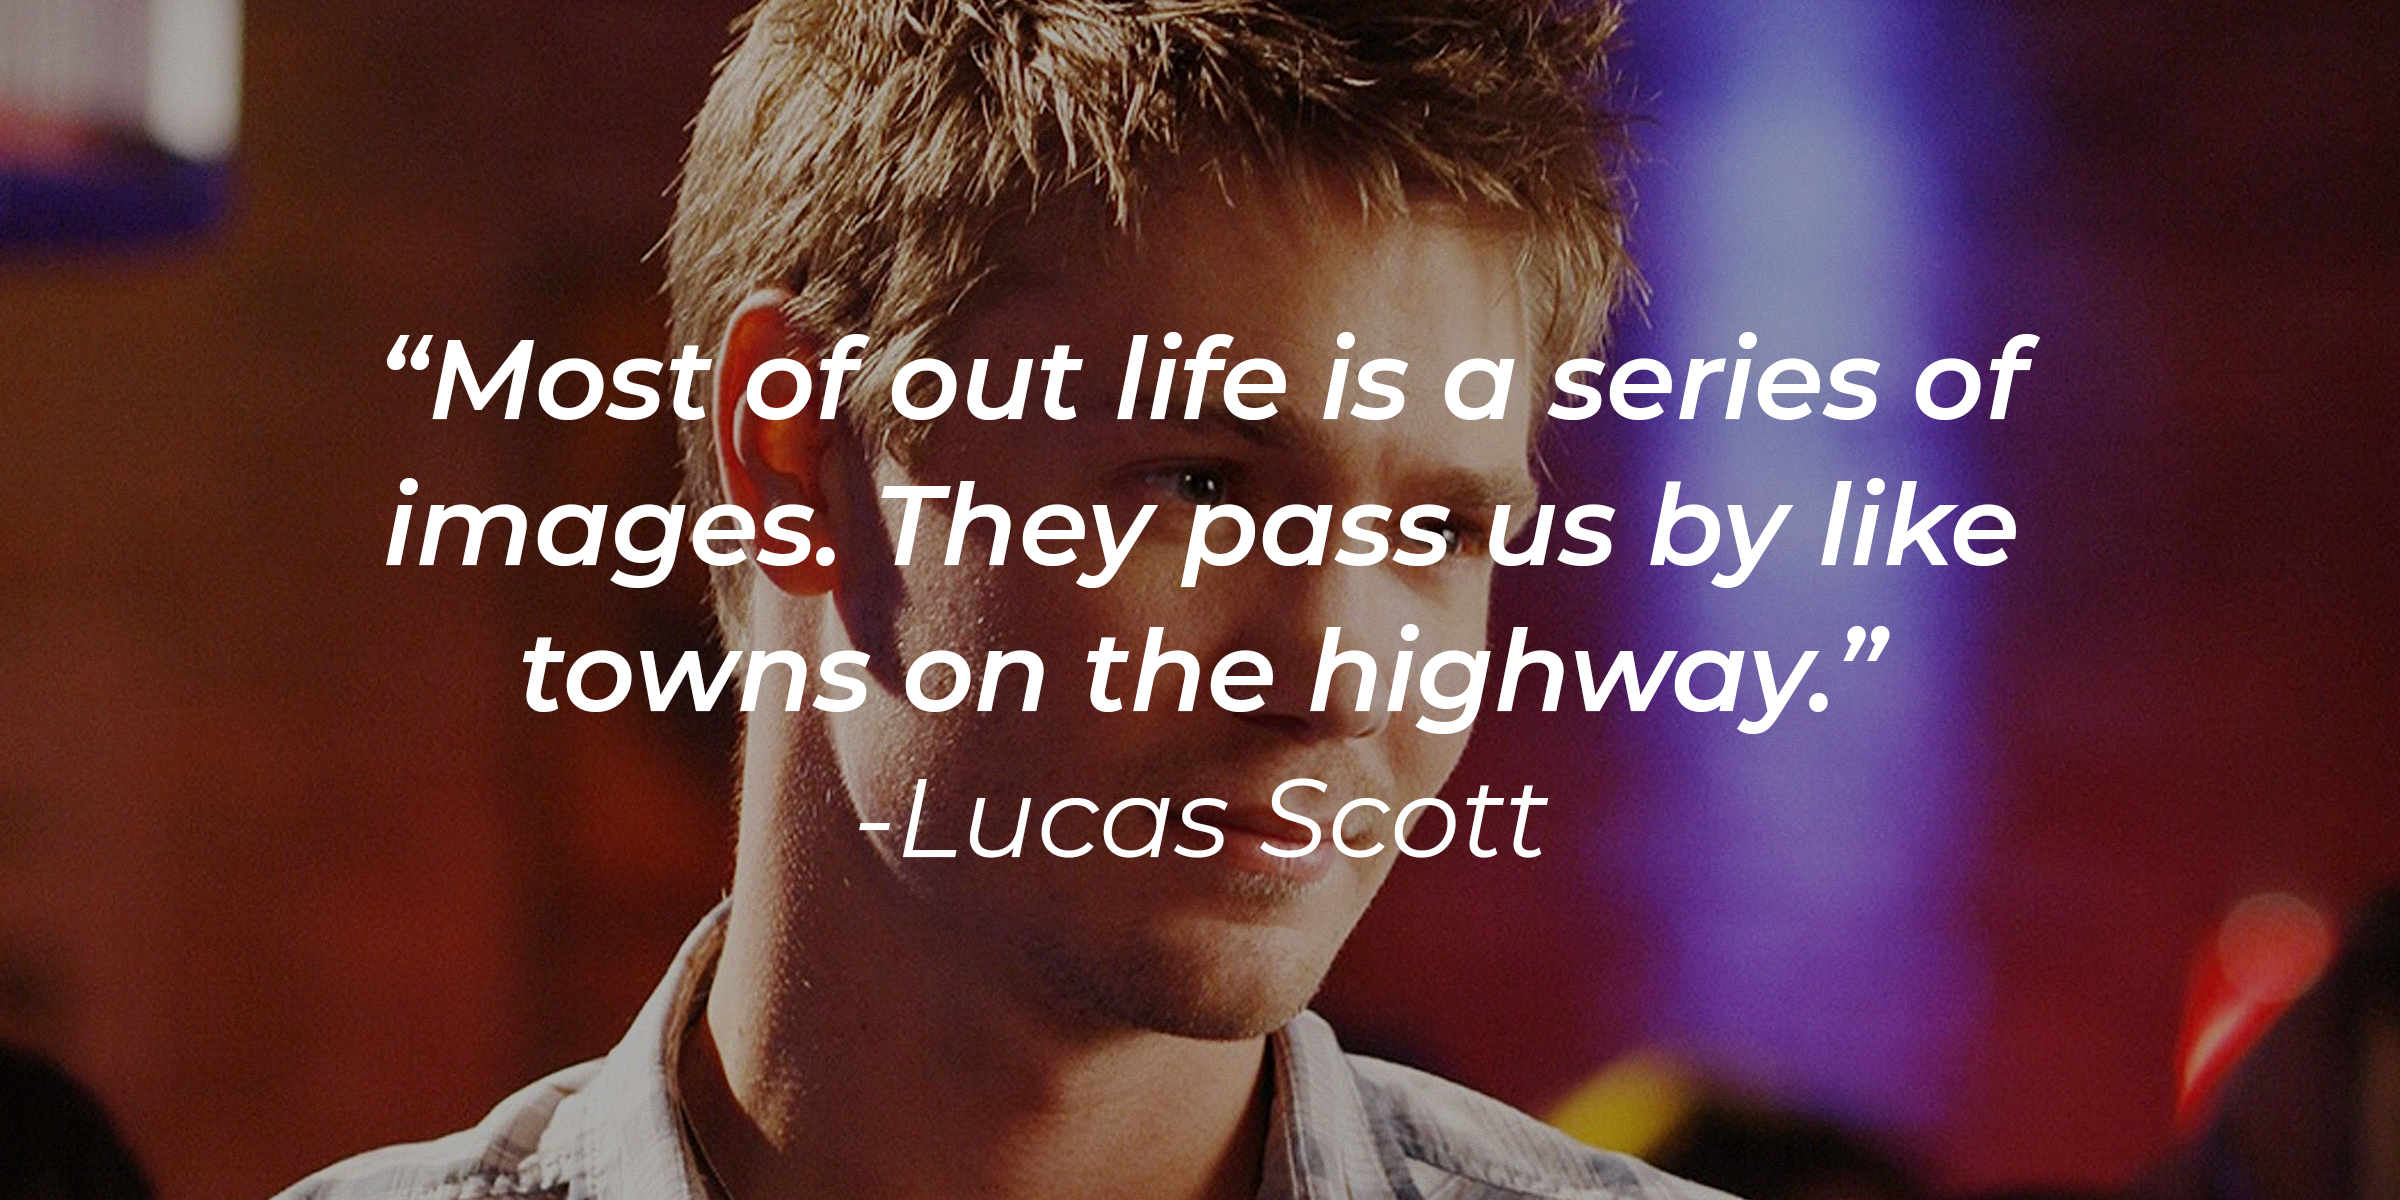 Lucas Scott, with his quote: "Most of out life is a series of images. They pass us by like towns on the highway.” | Source:facebook.com/OneTreeHill